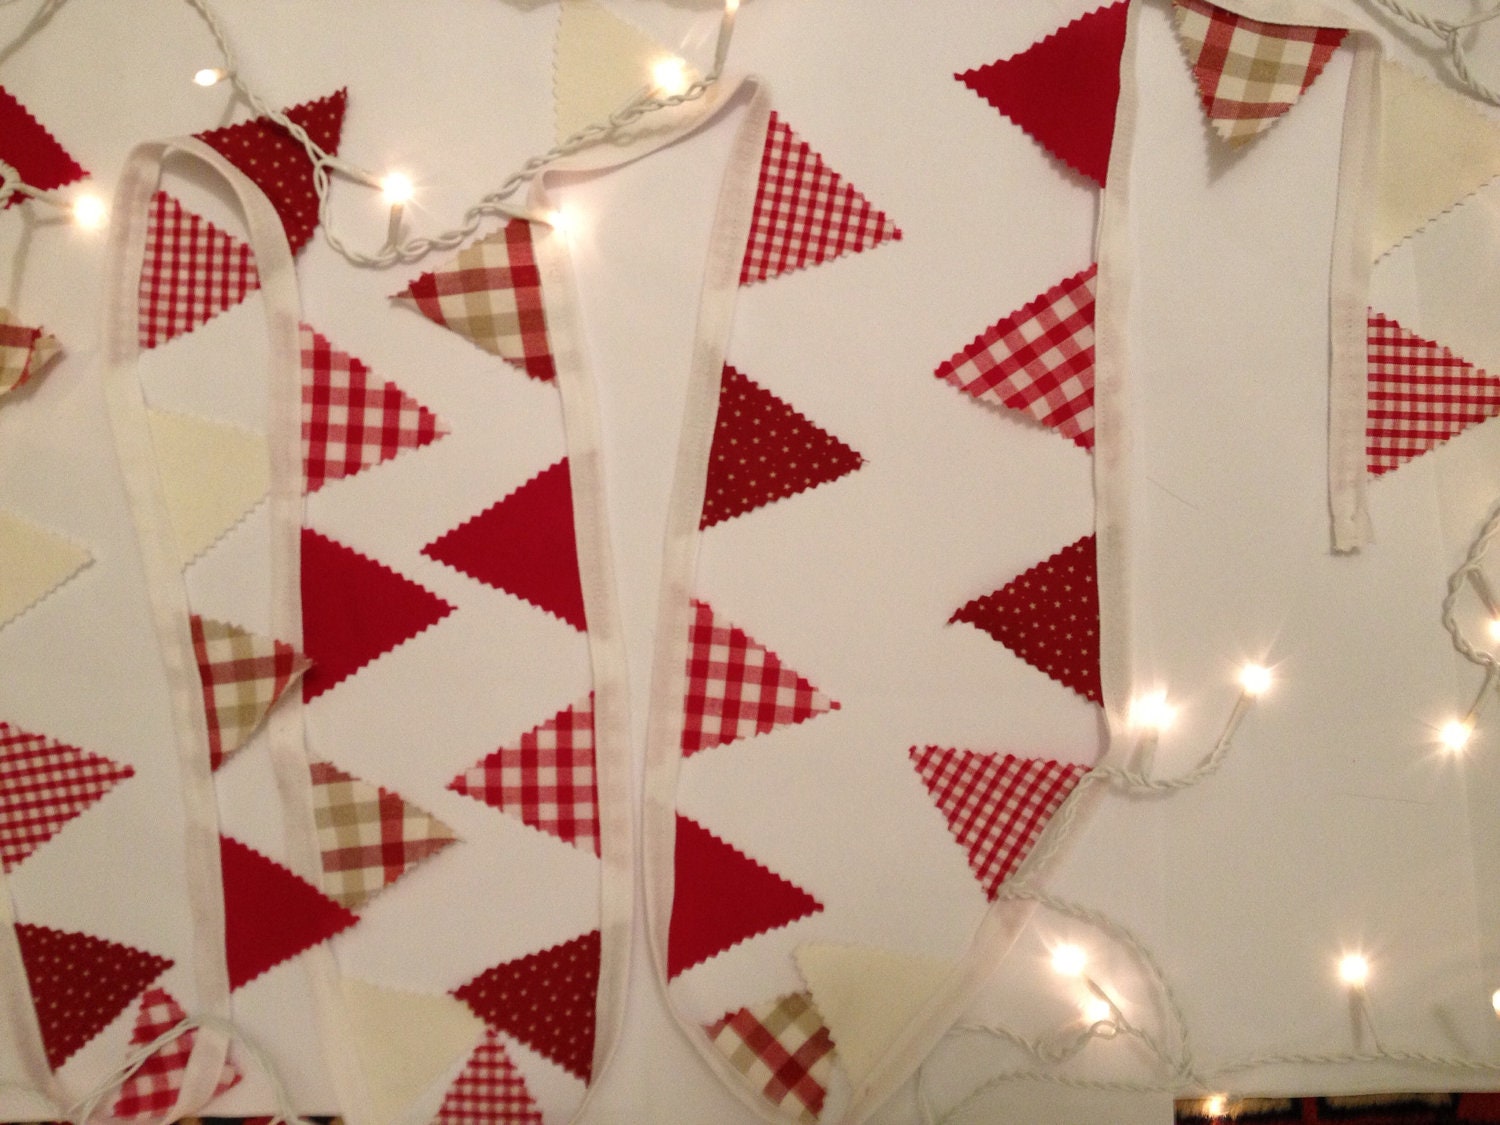 Traditional vintage look handmade mini bunting - red, cream and white